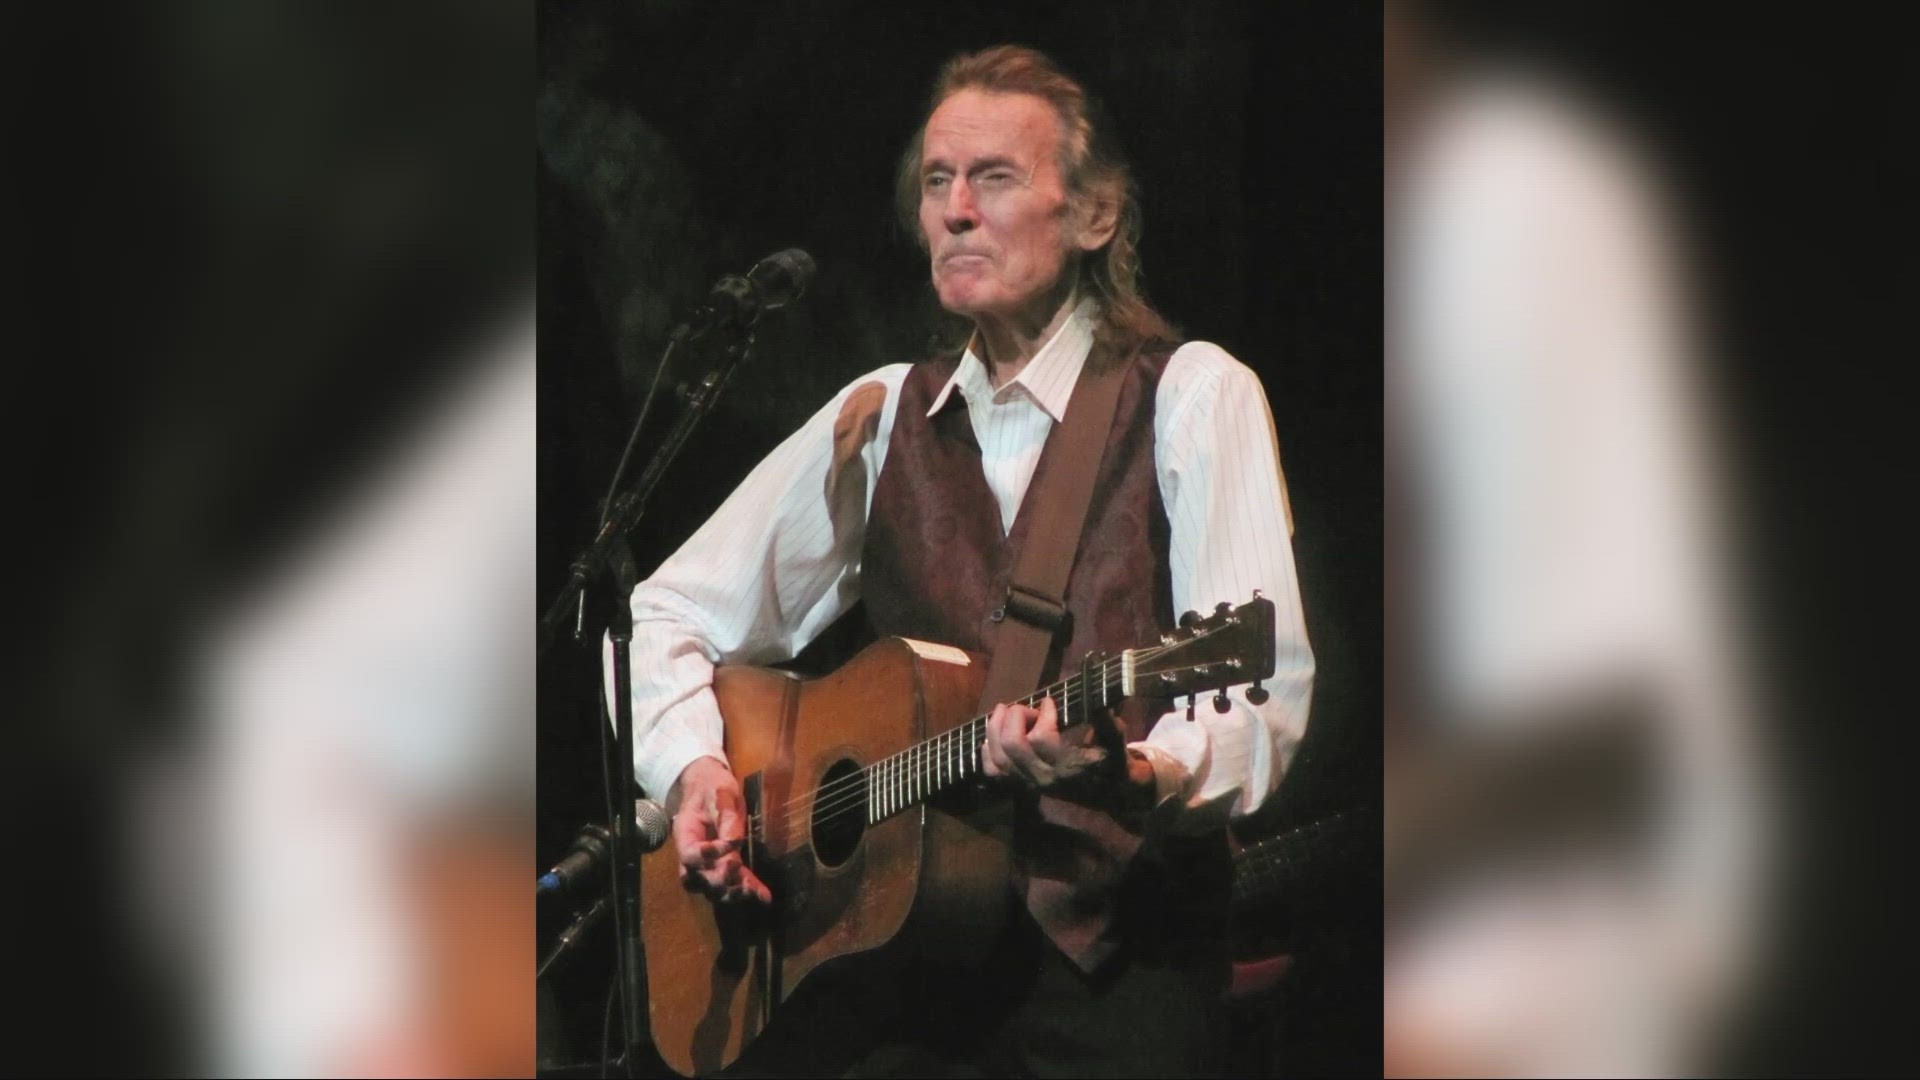 The legendary folk singer-songwriter's hits include “Early Morning Rain” and “The Wreck of the Edmund Fitzgerald."